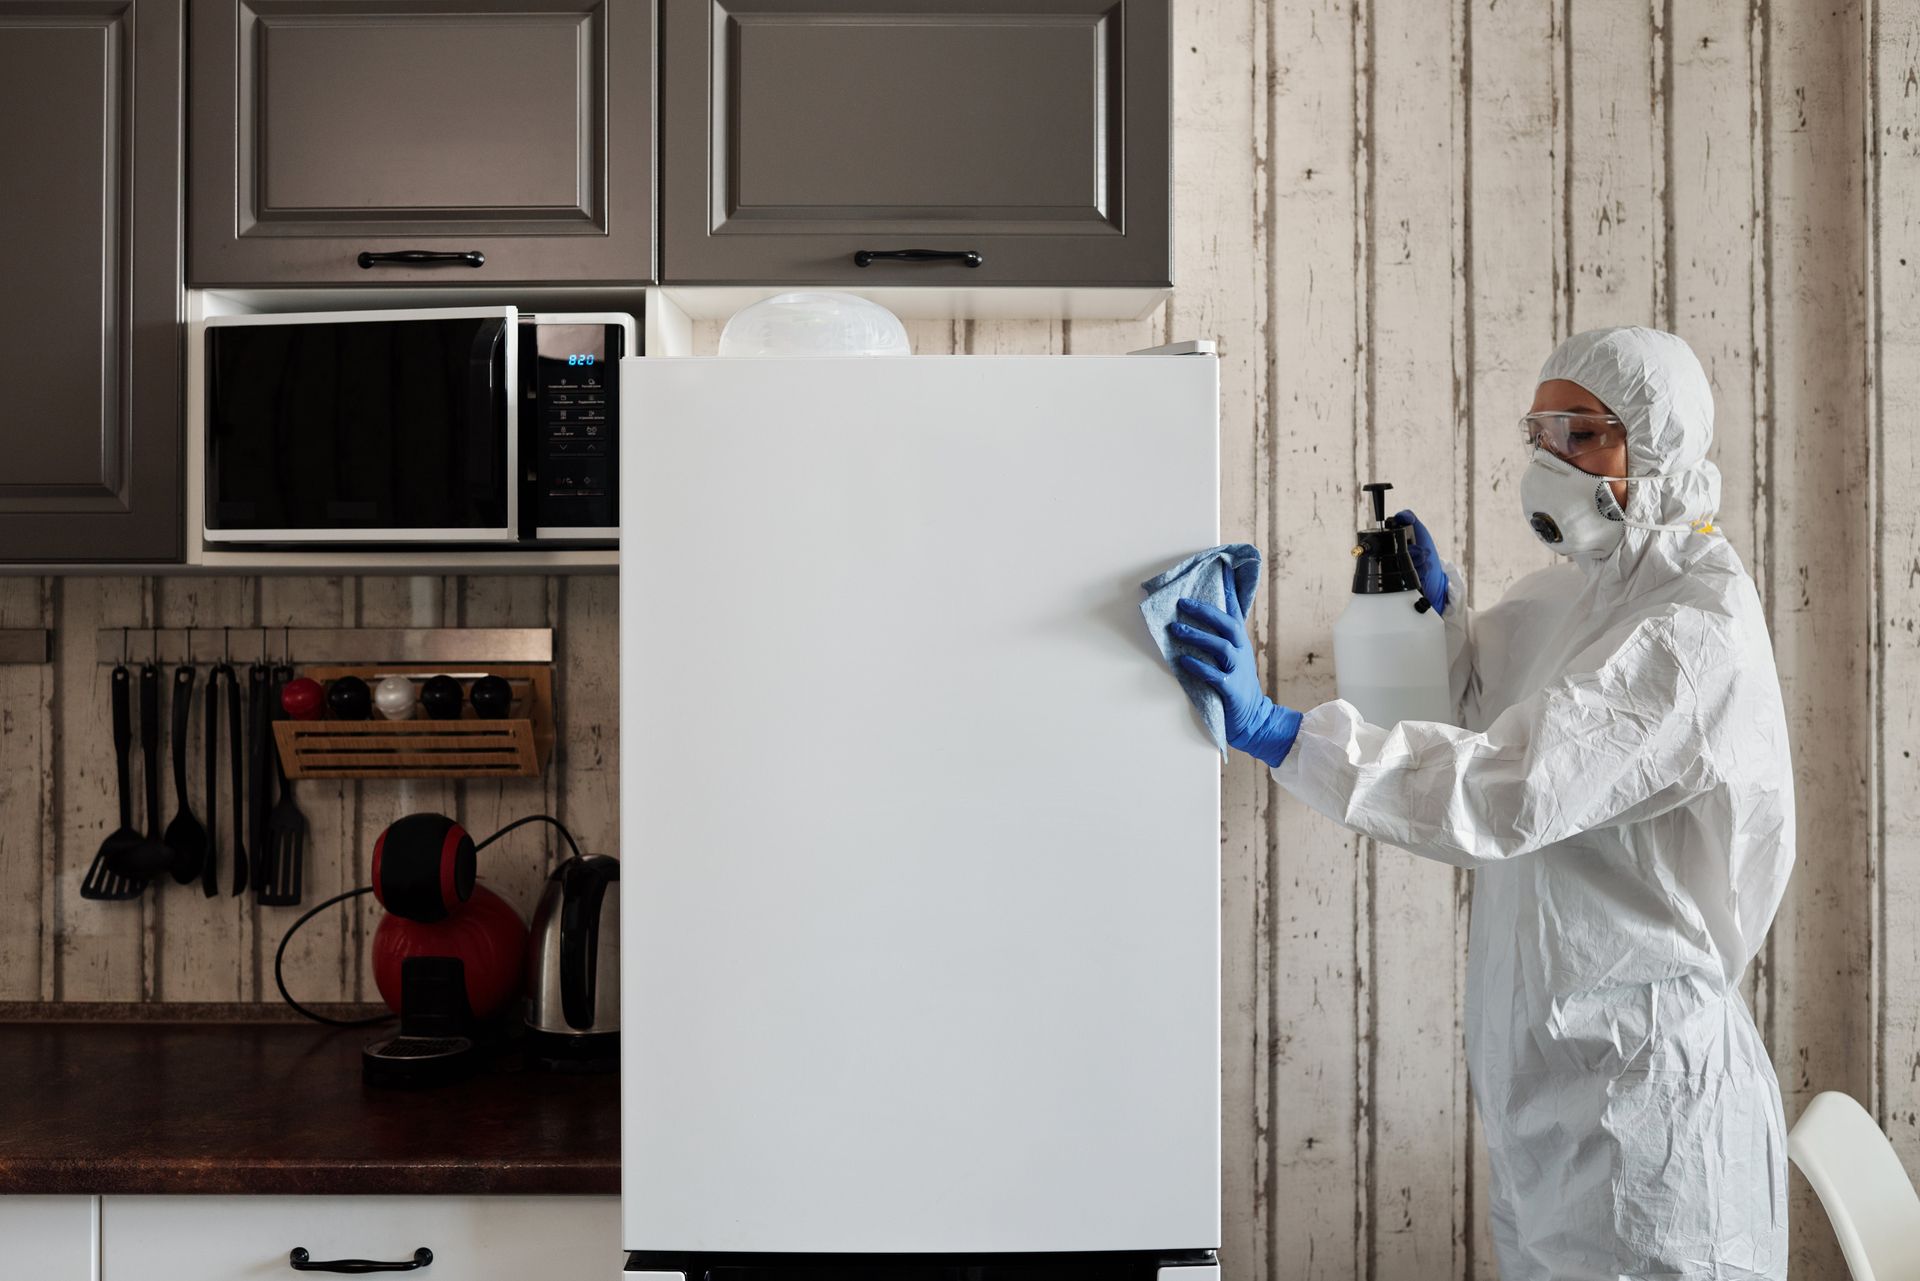 a man in a protective suit is cleaning a refrigerator in a kitchen